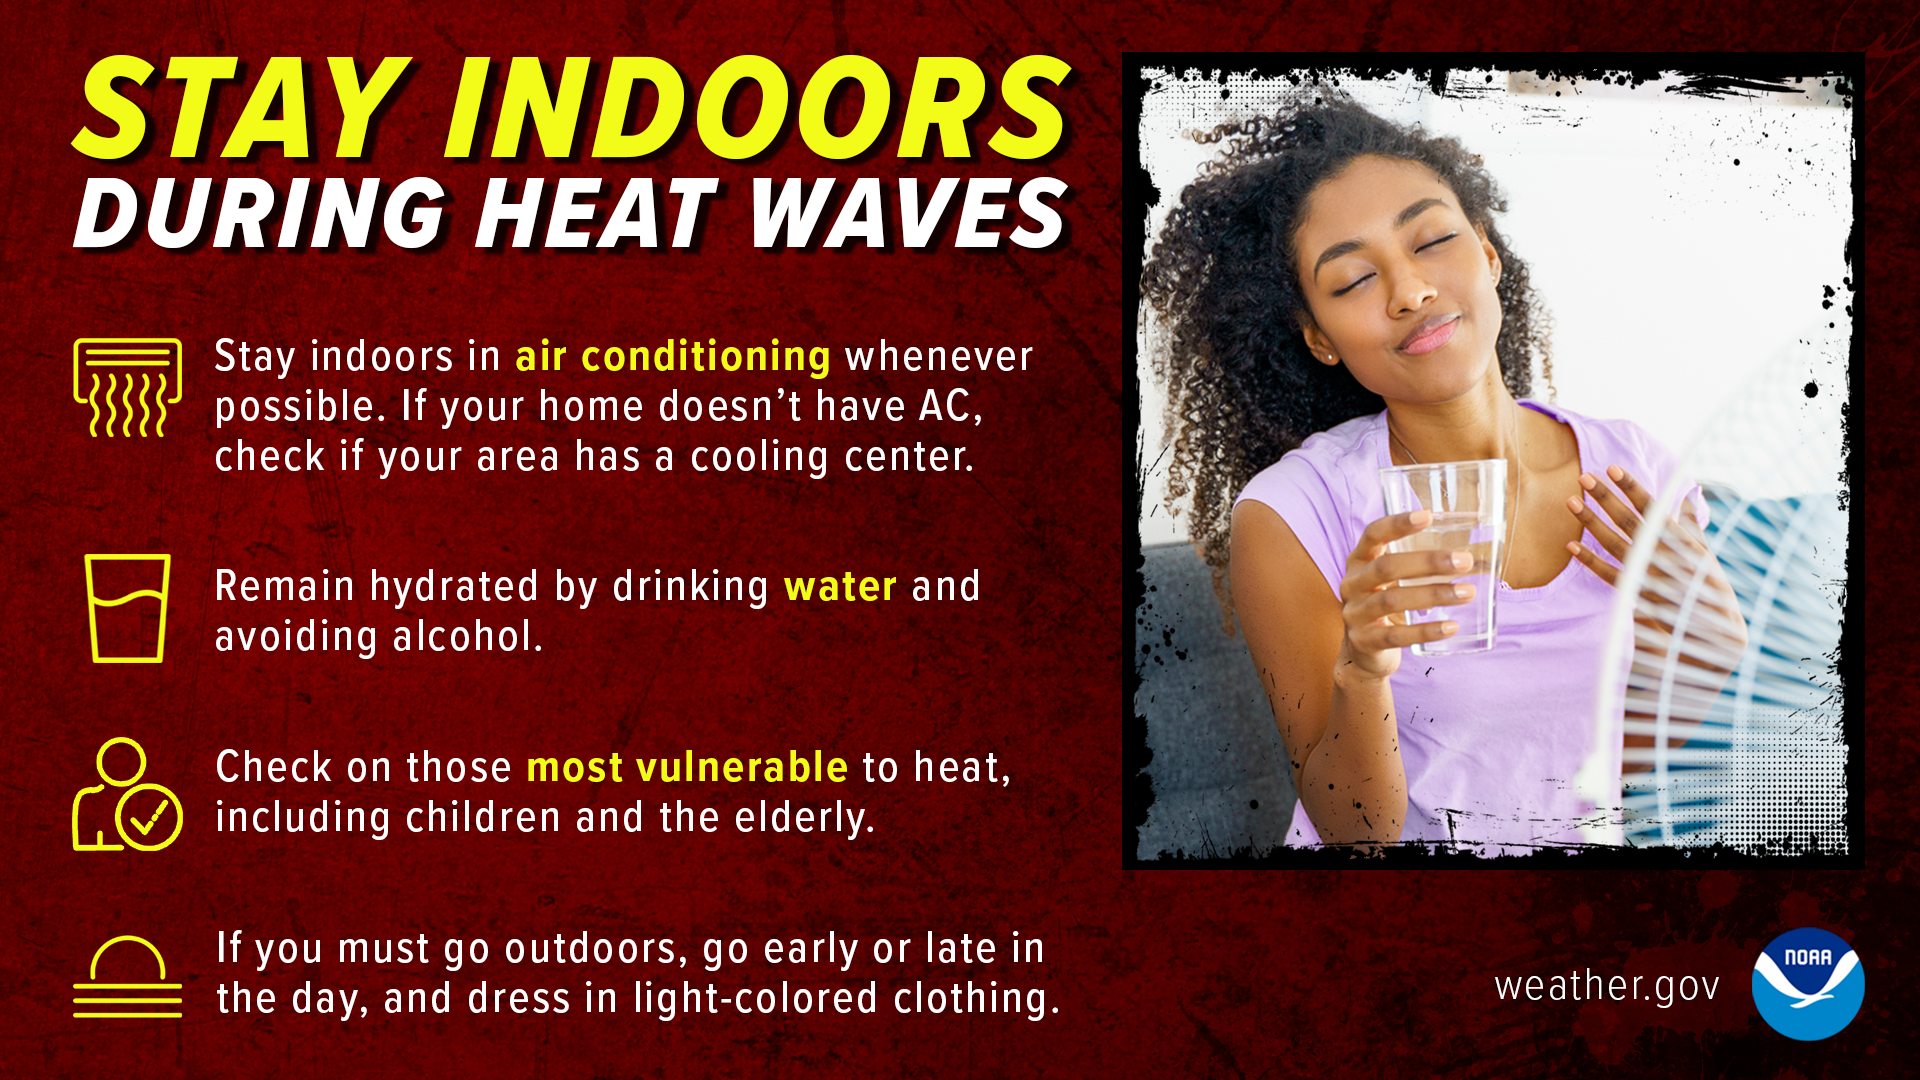 Stay indoors during heat waves. Stay indoors in air conditioning whenever possible. If your home doesn't have AC, check if your area has a cooling center. Remain hydrated by drinking water and avoiding alcohol. Check on those most vulnerable to heat, including children and the elderly. If you must go outdoors, go early or late in the day, and dress in light-colored clothing.